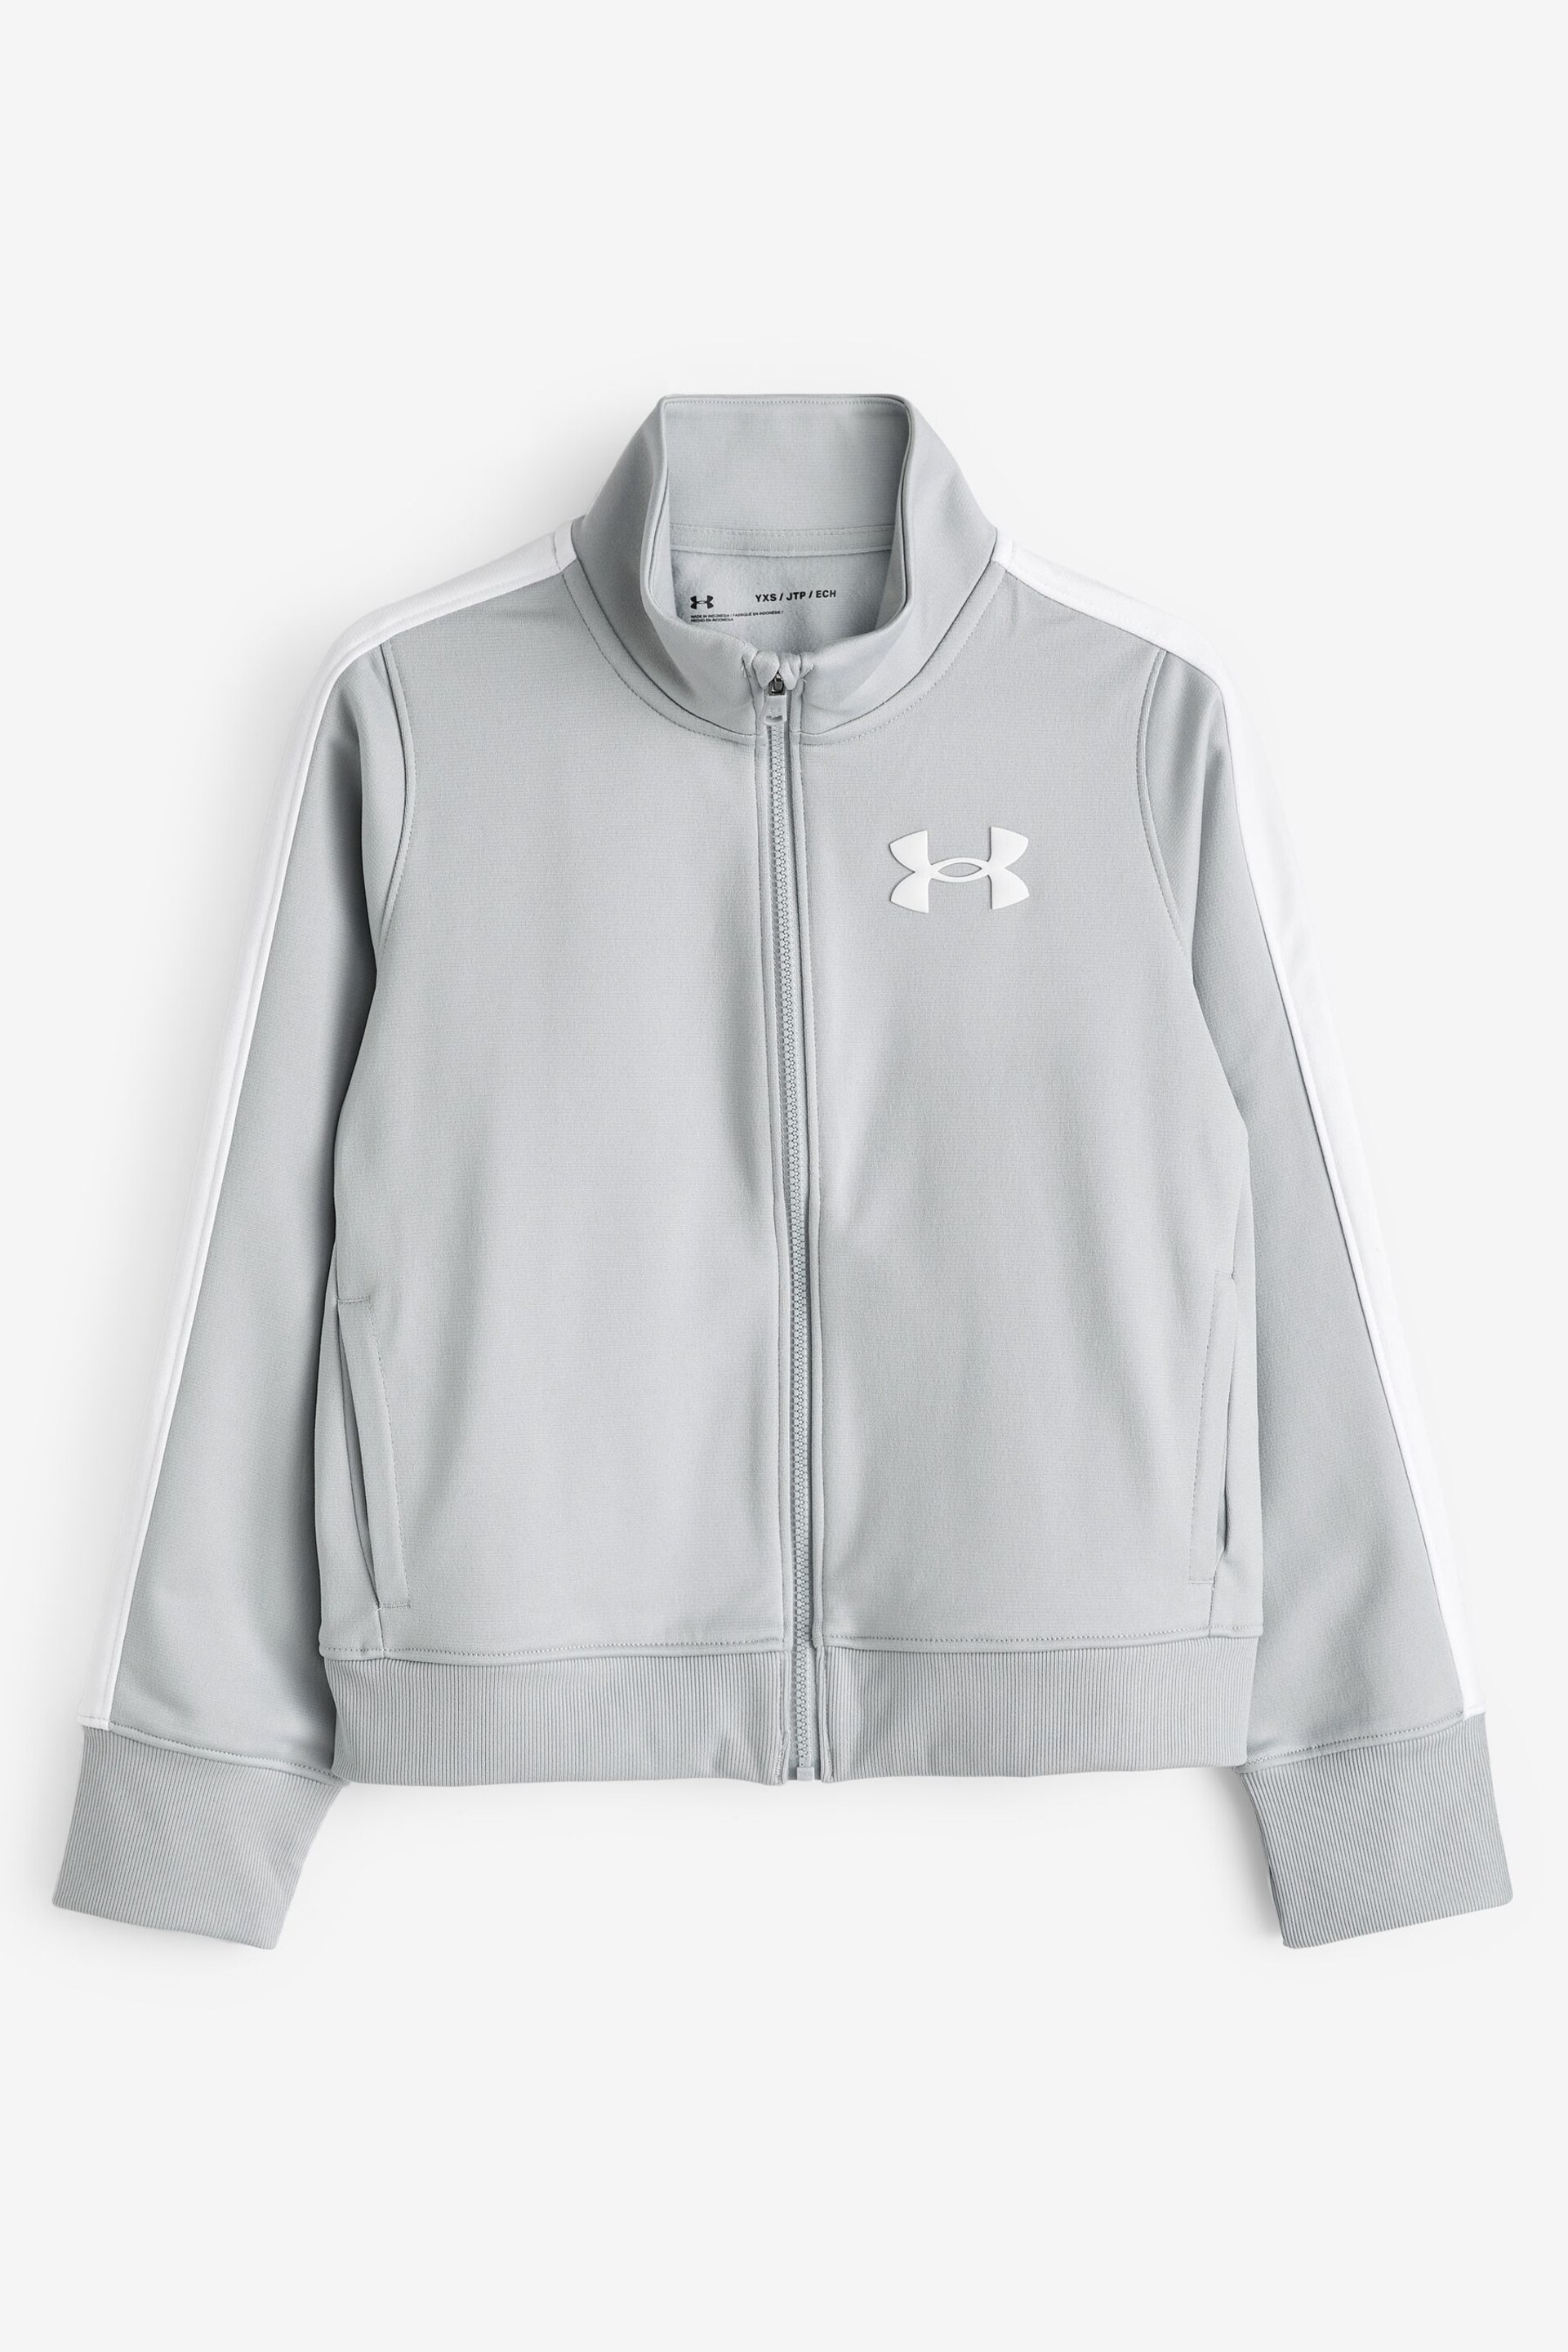 Under Armour Grey Knit Tracksuit - Image 3 of 4